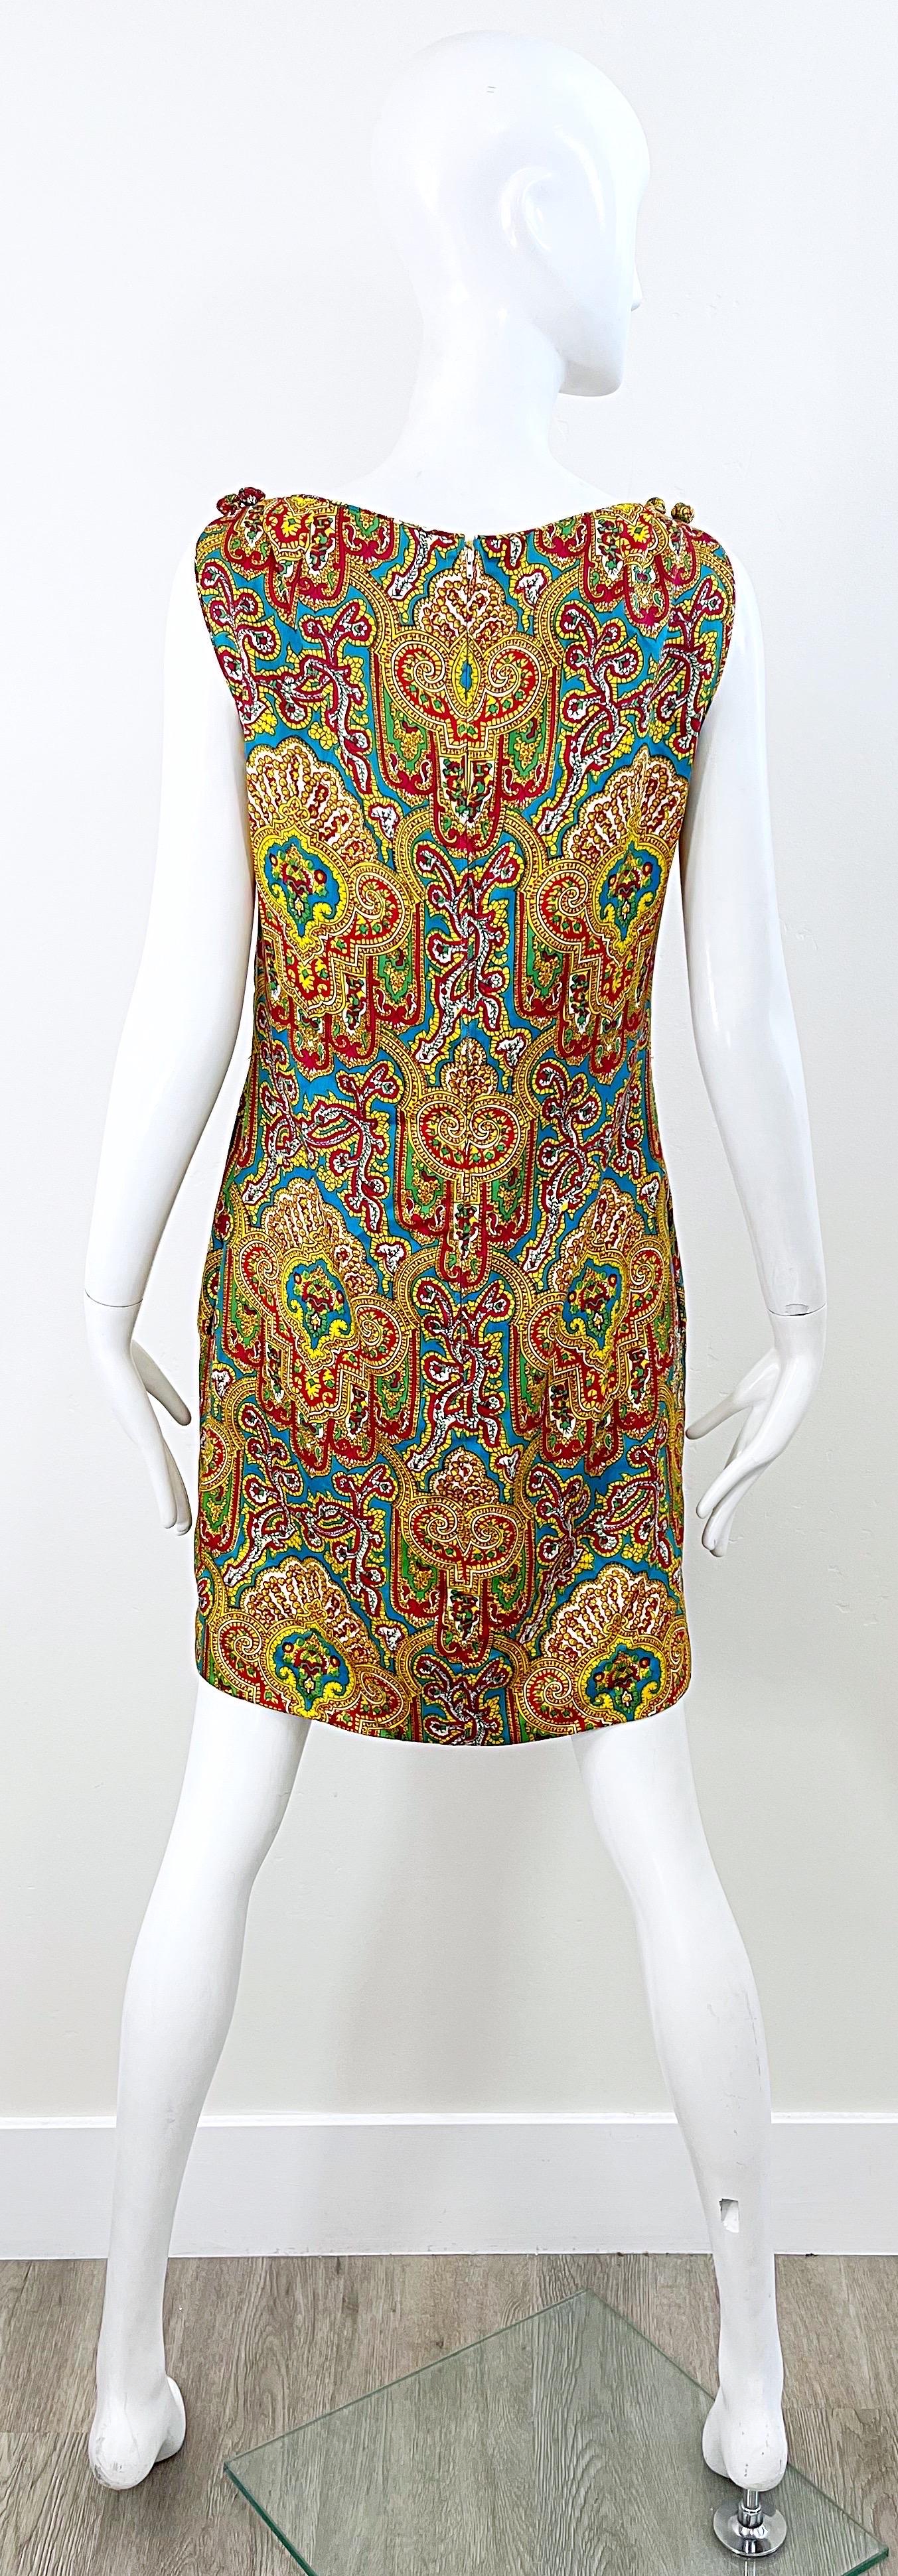 1960s Dynasty Paisley Bright Colorful Silk Vintage 60s Sleeveless Shift Dress For Sale 5